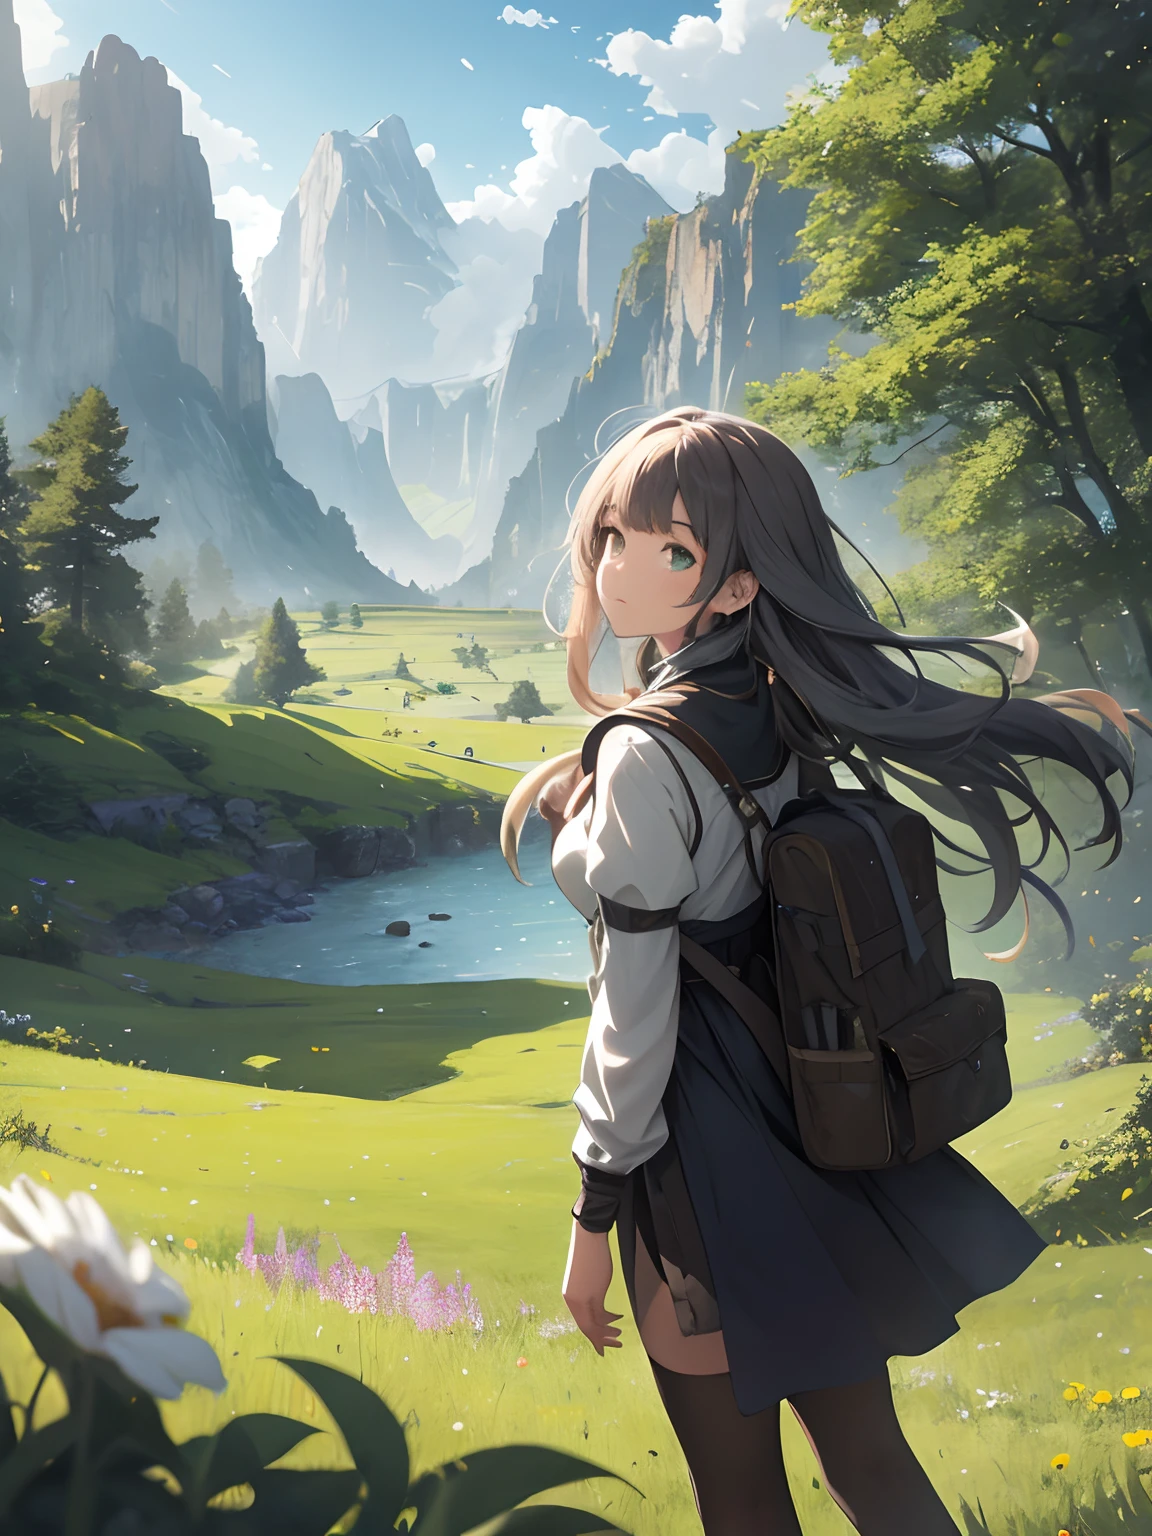 In a green meadow stands a girl leading a group of knights.
BREAK
With a brave expression, she guides them towards their destination.
BREAK
Behind her, a green forest stretches out and beyond that, mountains rise in the distance.
BREAK
The most suitable effect for this scene would be a watercolor painting technique to capture the softness of the meadow and the fluidity of the movement.